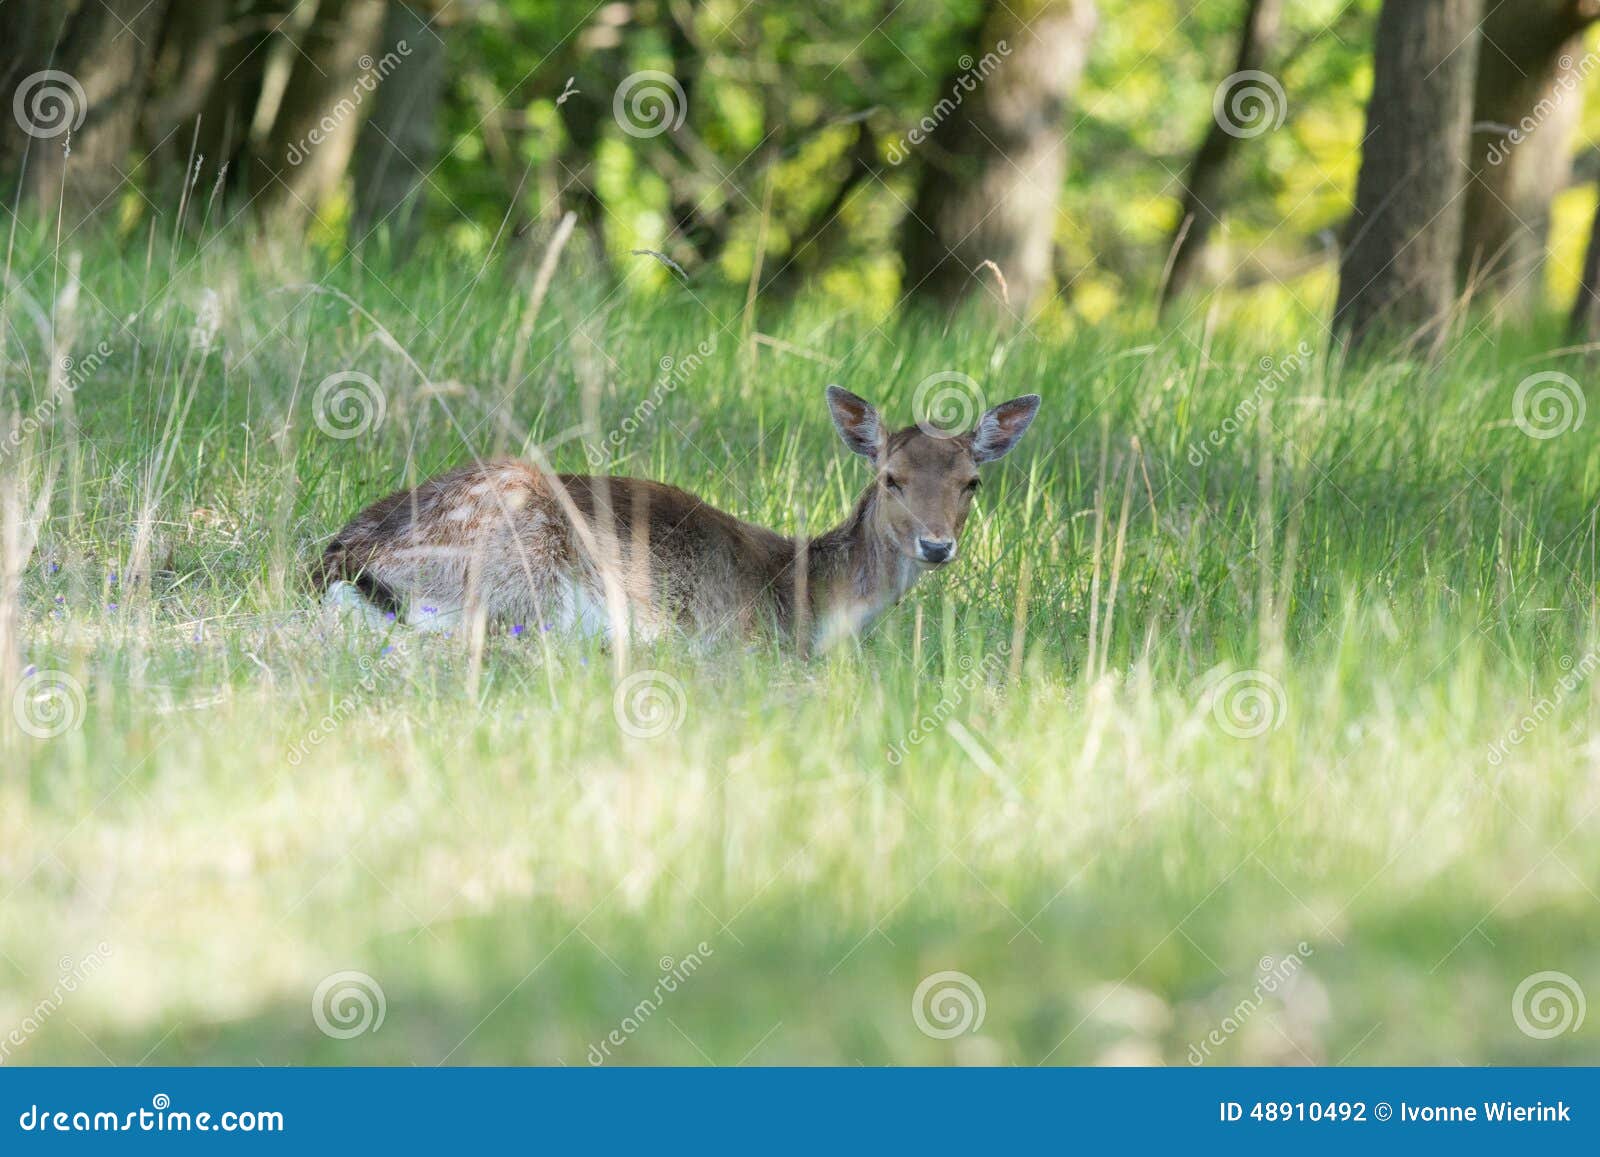 Roe deer laying in high grass. Roe deer in nature landscape laying in high grass